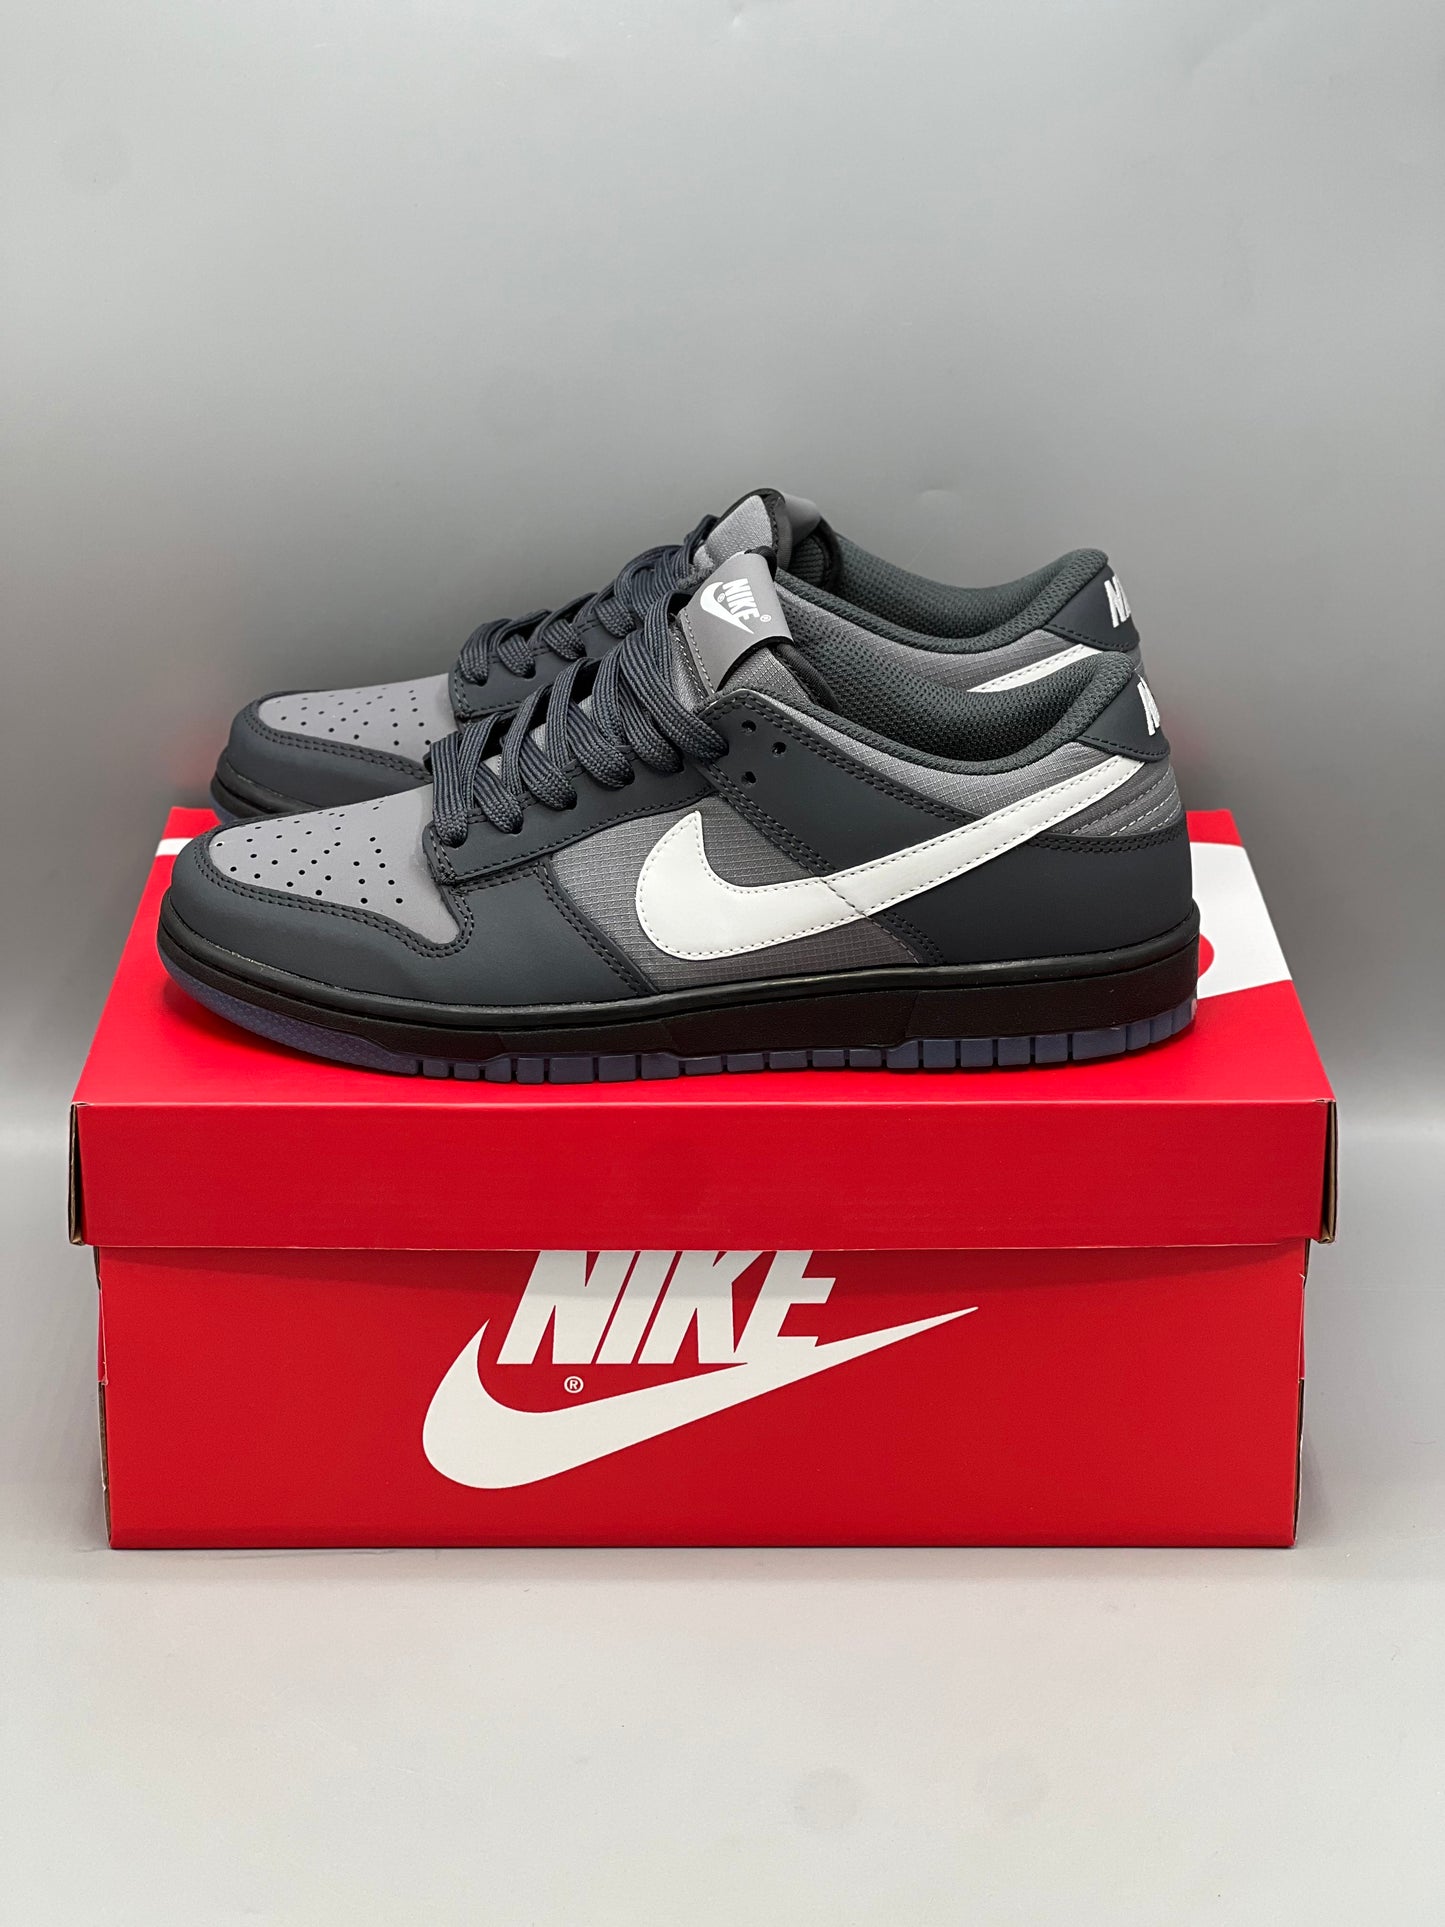 Nike dunk low “Anthracite”